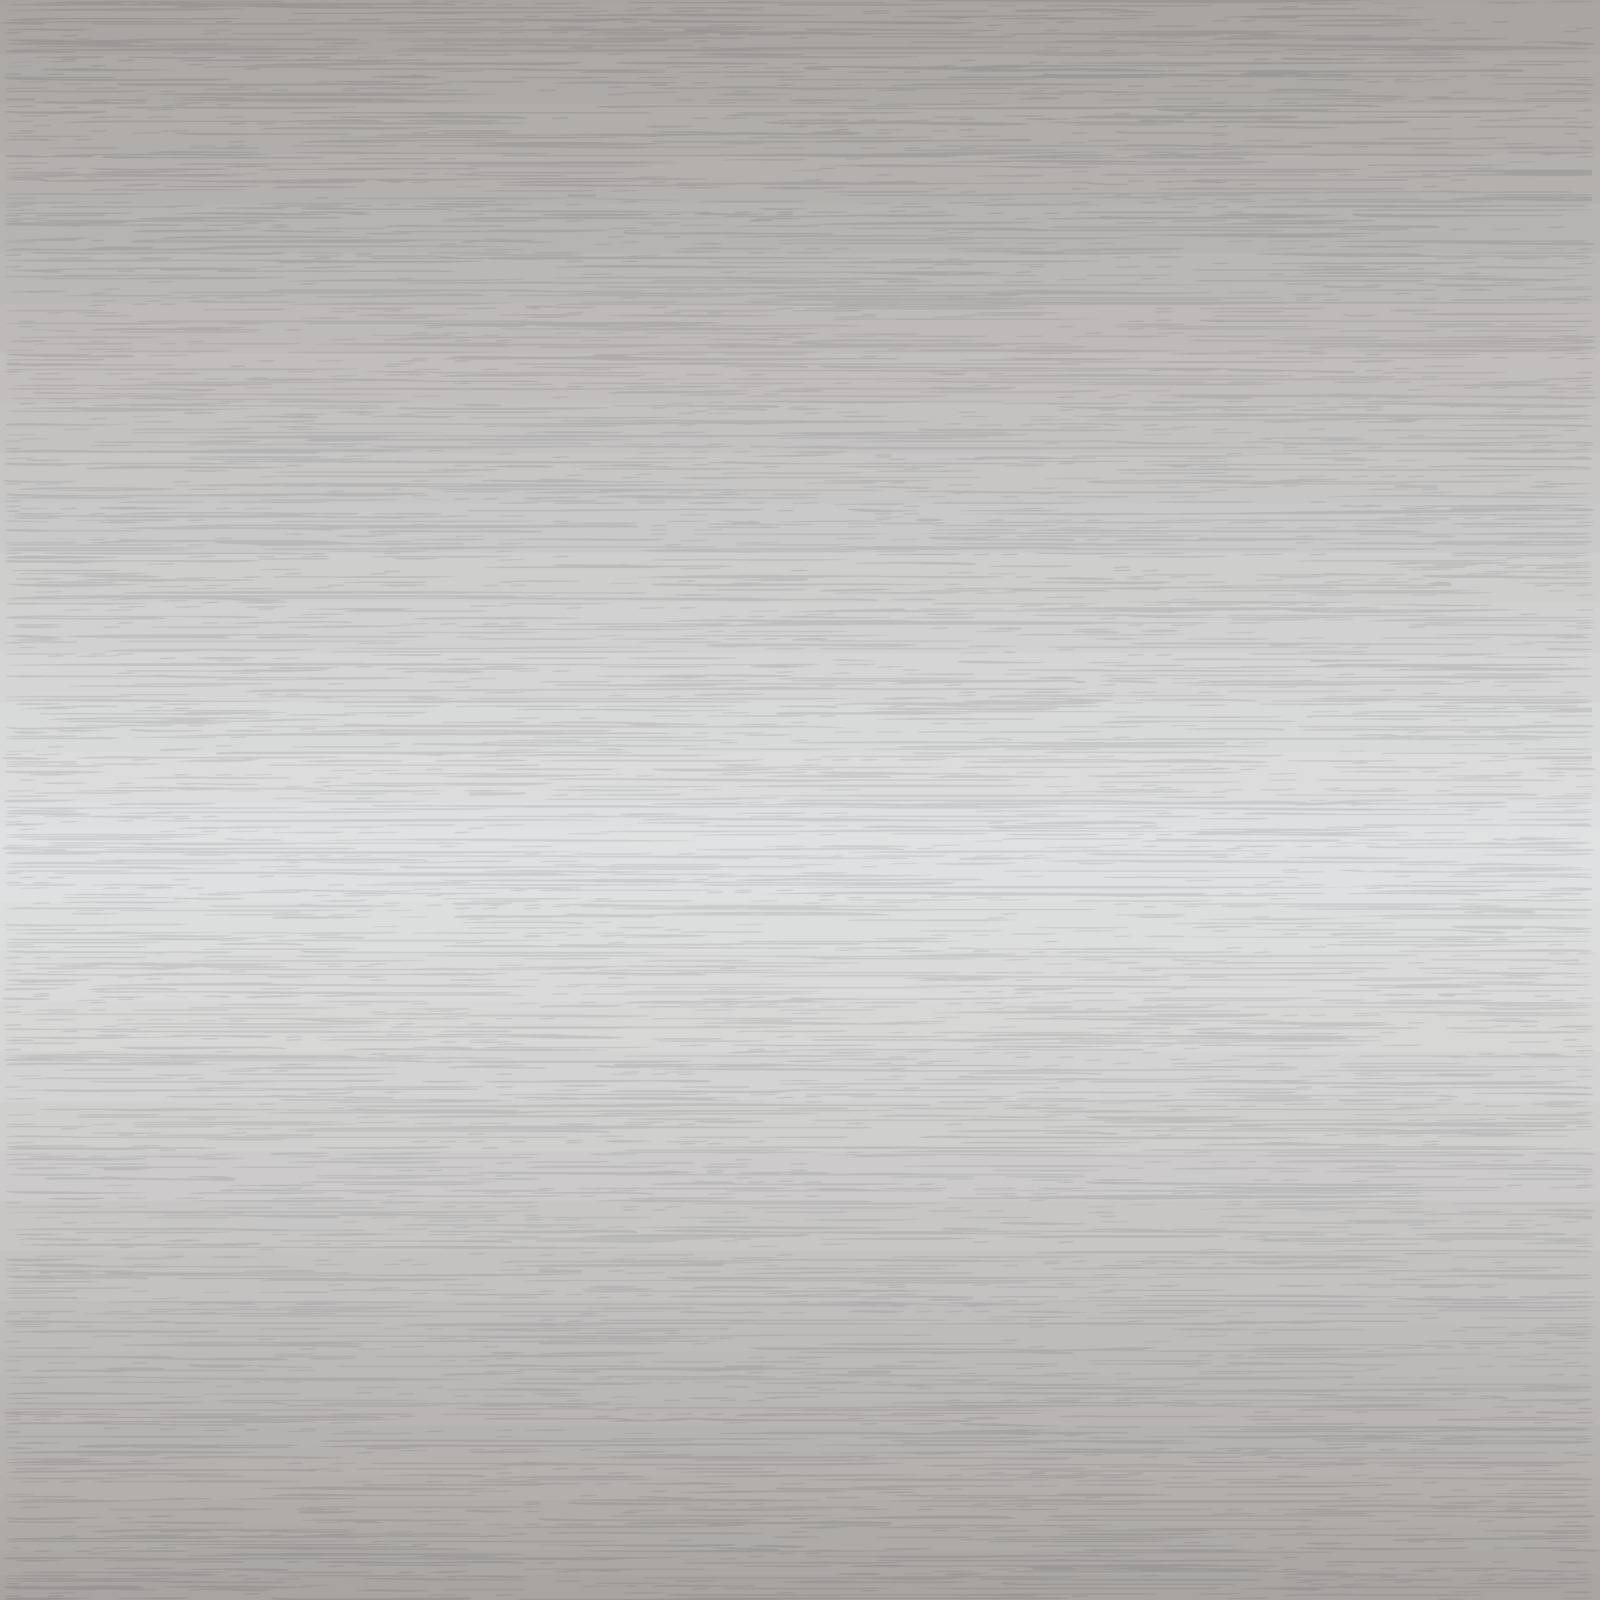 brushed steel surface by Istanbul2009